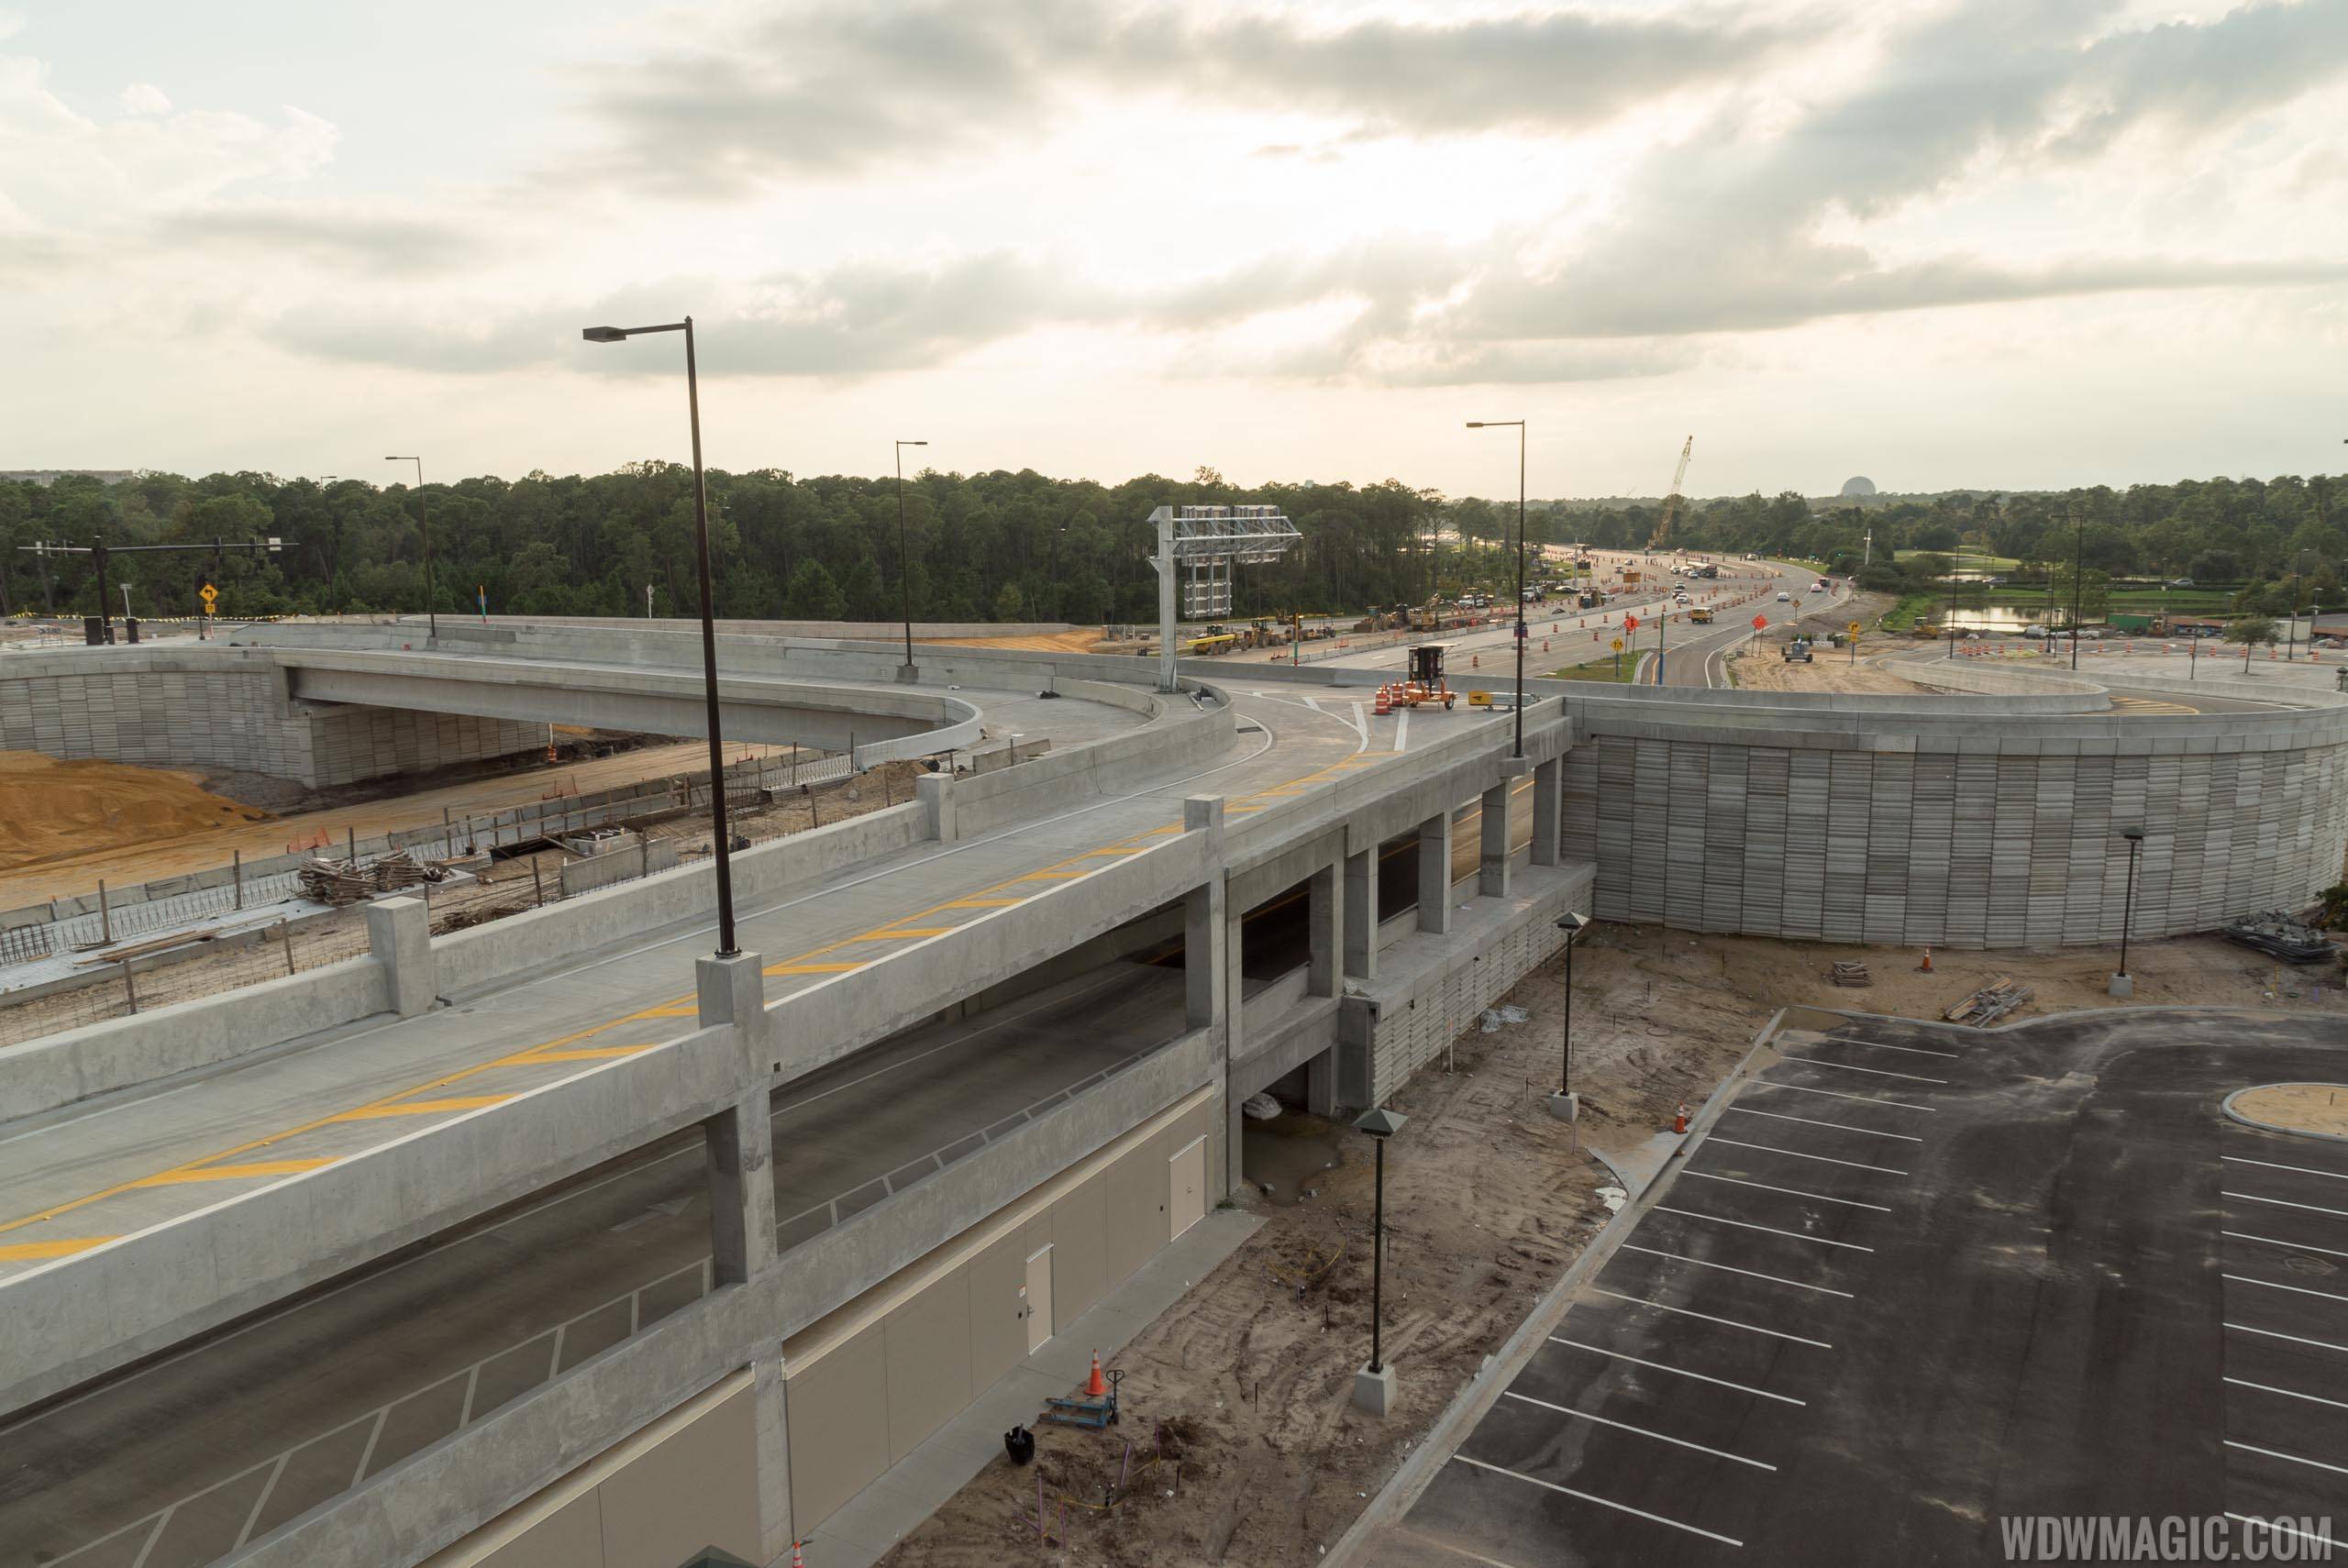  VIDEO - Another Disney Springs milestone is reached as Buena Vista Drive flyover ramp opens to guests